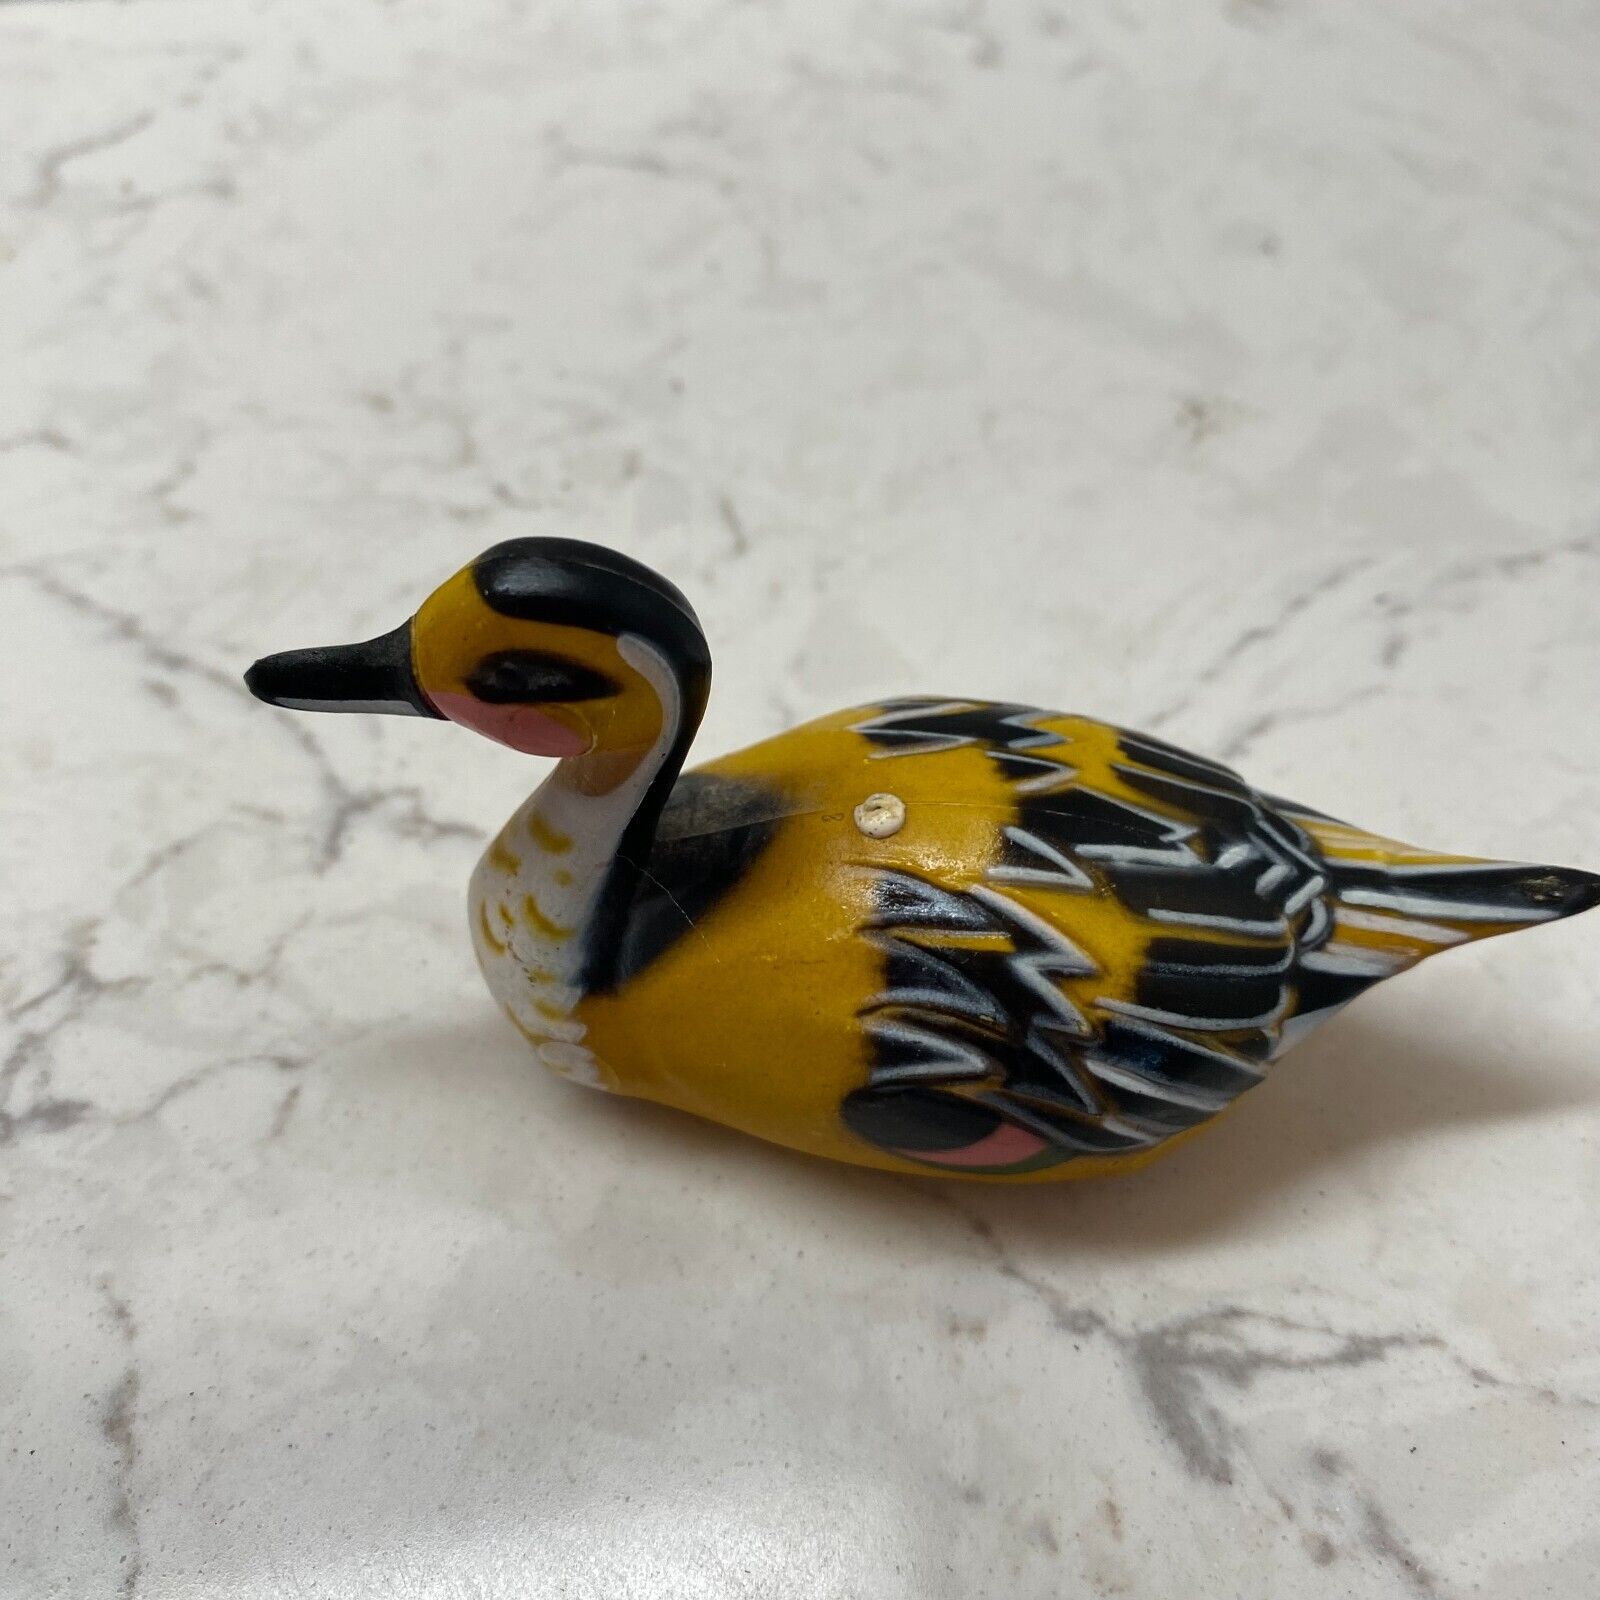 Vintage Miniature Yellow Black Duck Figurine Collectibles Gift Home Decor